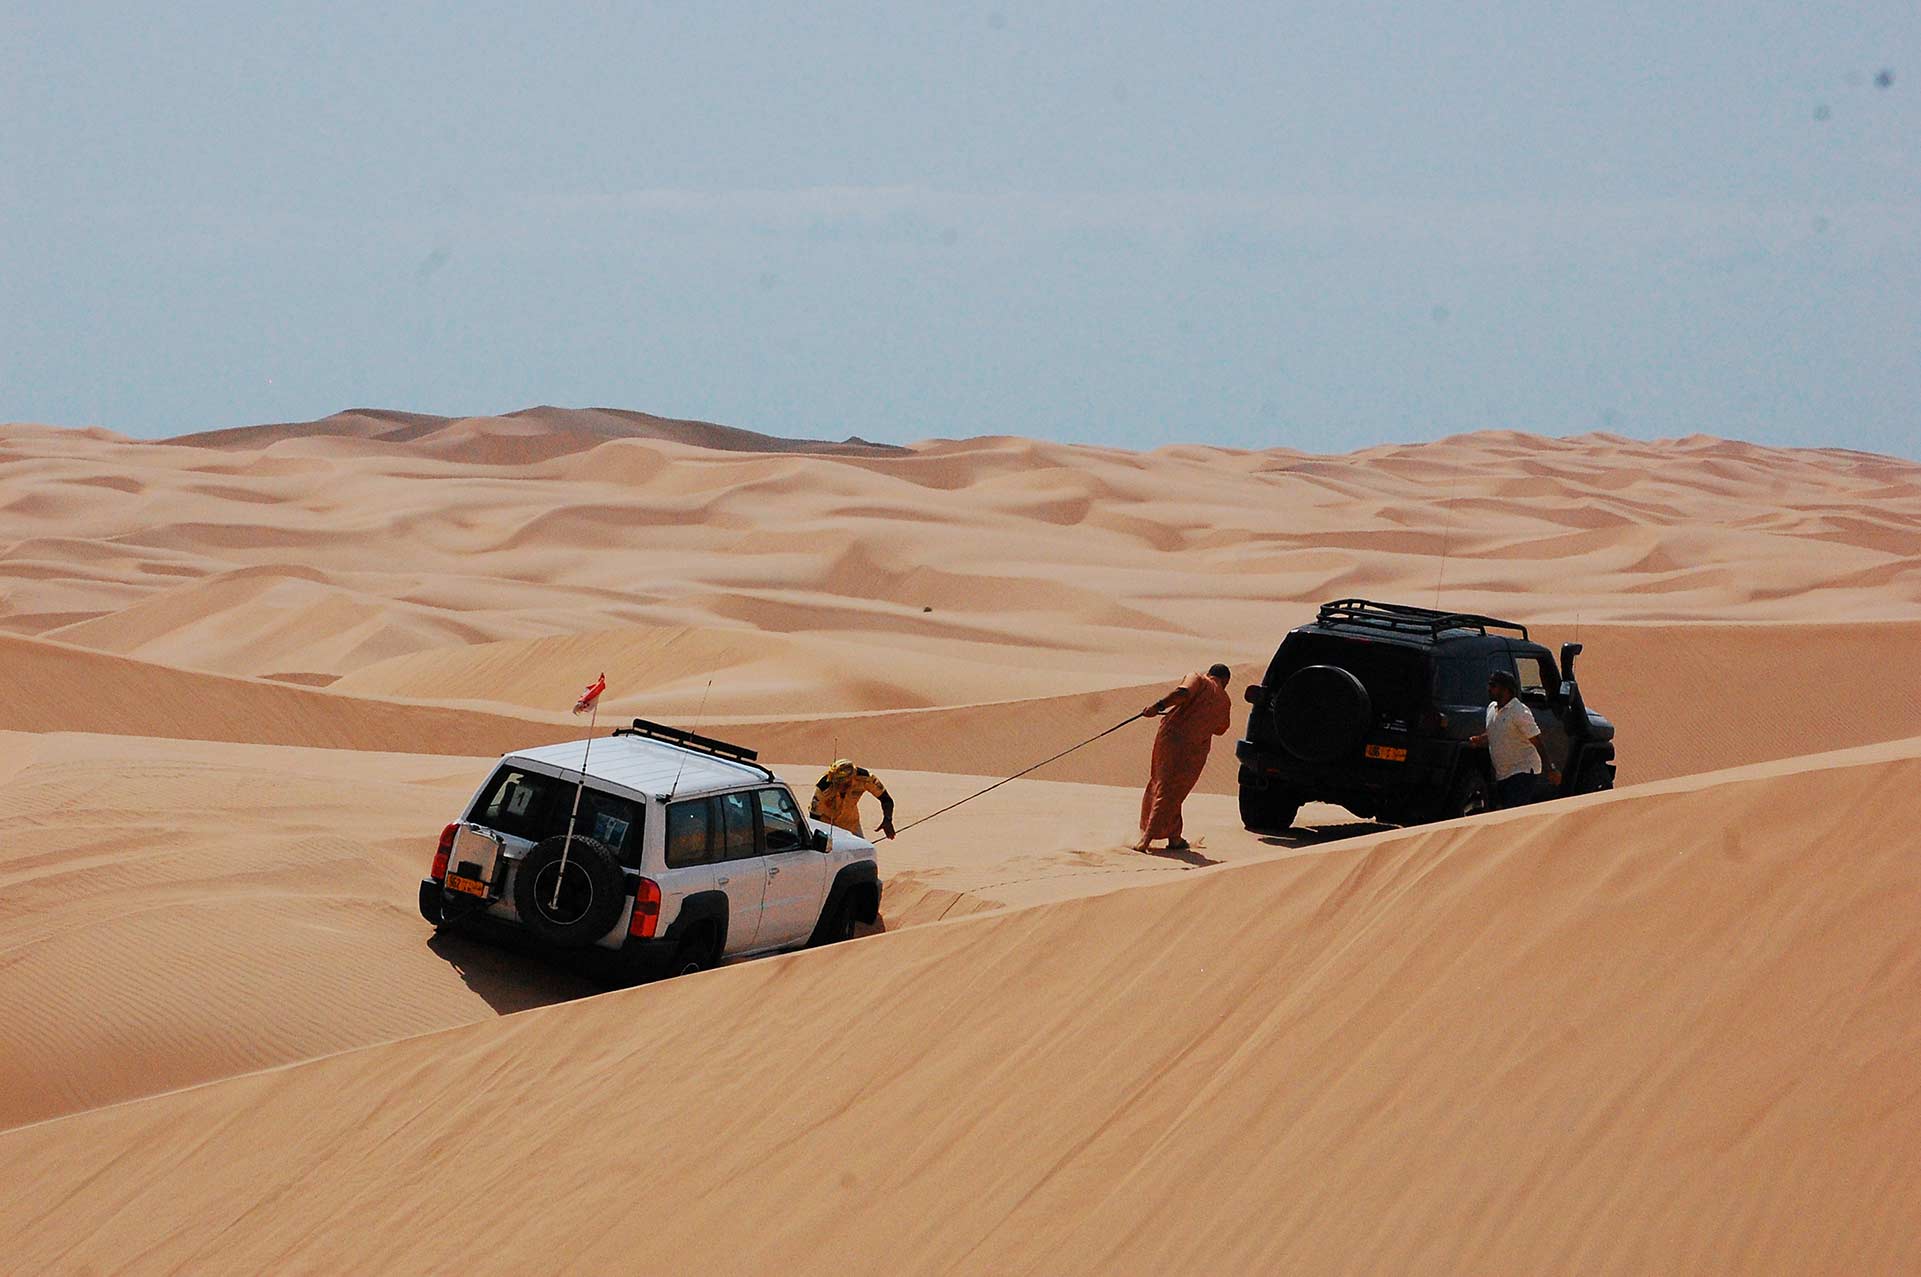 Driving on jeeps on the desert, traditional entertainment for tourists